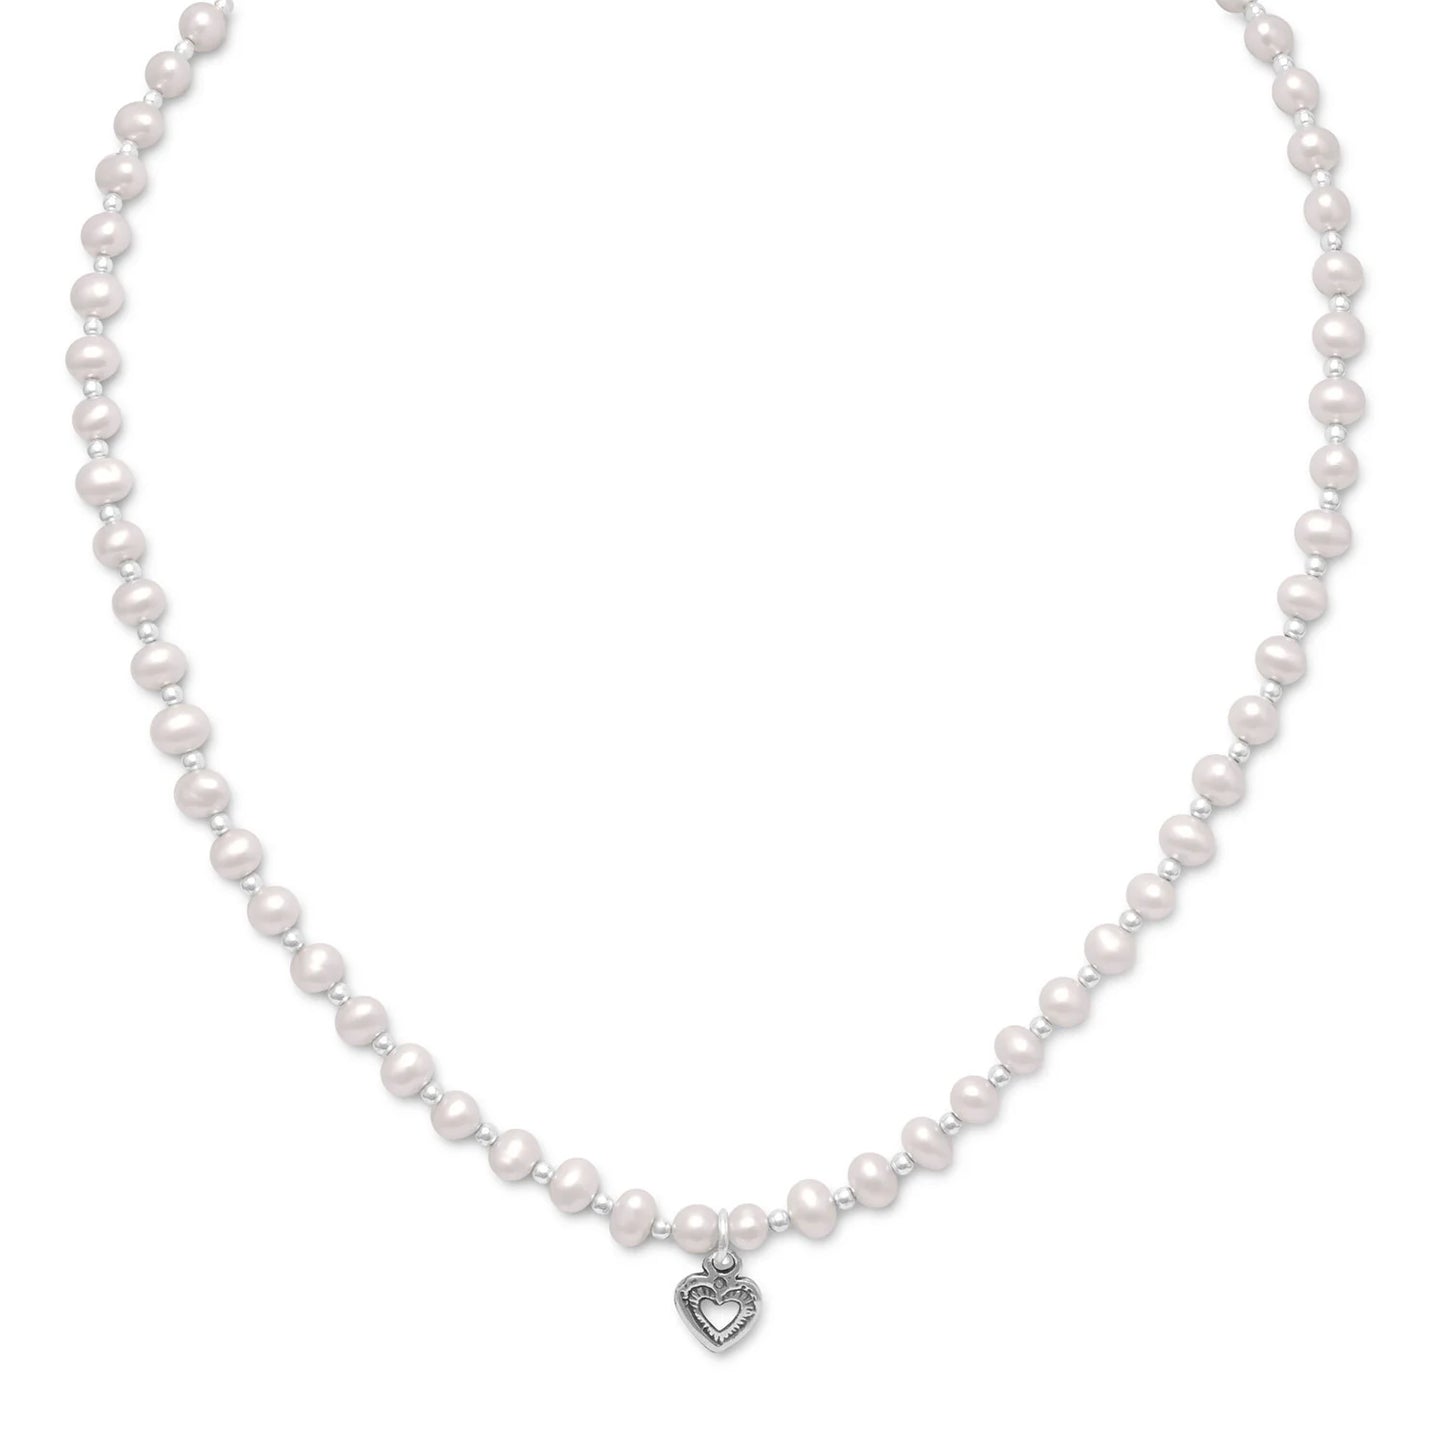 13"+2" Extension Cultured Freshwater Pearl/Silver Bead Necklace with Oxidized Heart